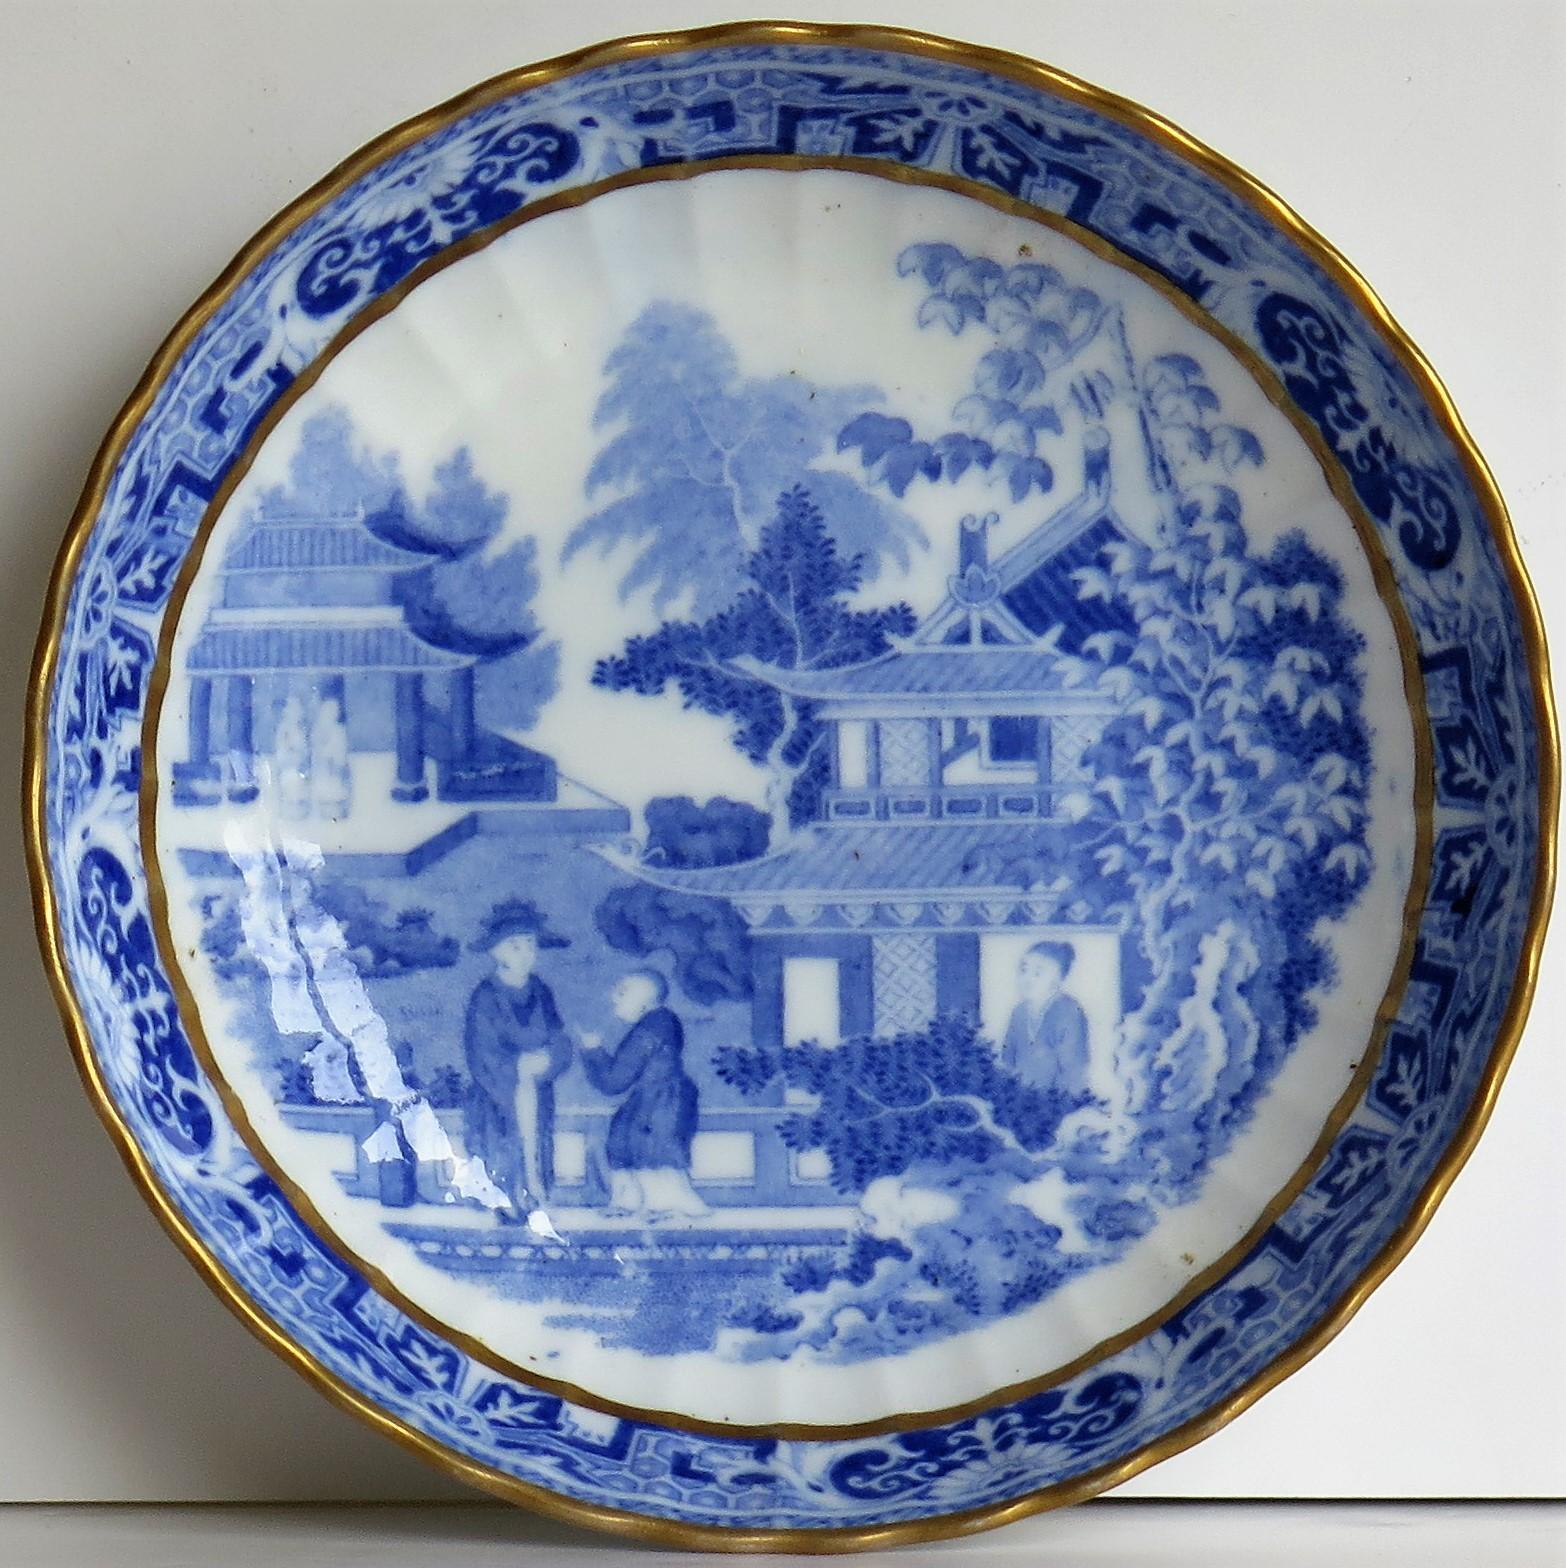 This is a porcelain blue and white, hand gilded Saucer Dish made by Miles Mason (Mason's), Staffordshire Potteries, England around the turn of the 18th century, circa 1805.

The dish is well potted on a low foot with fluted sides and a scalloped